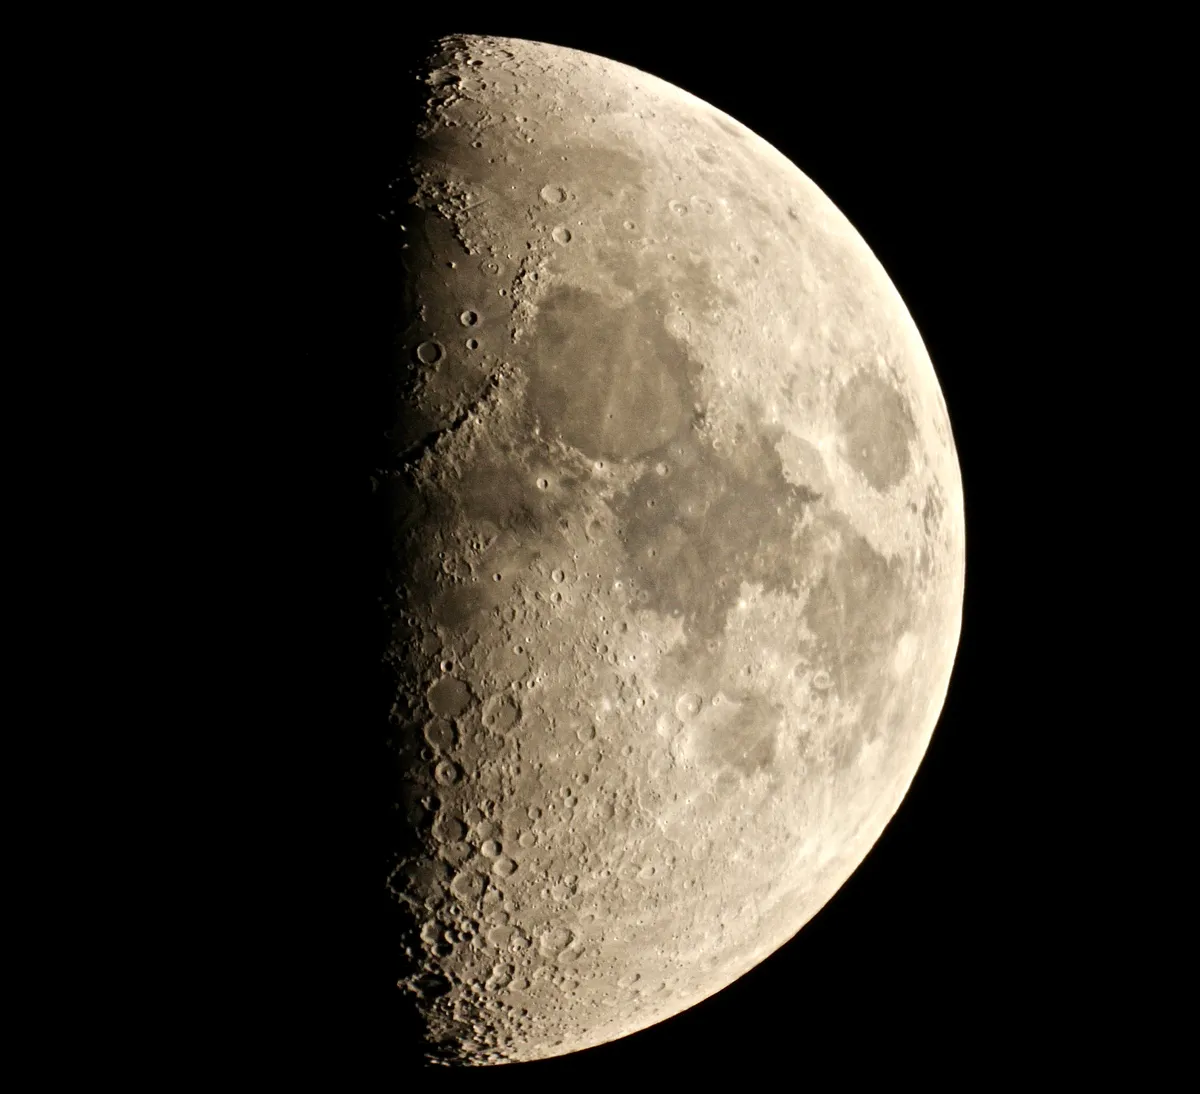 Waxing Gibbous Moon by Sarah & Simon Fisher, Bromsgrove, Worcestershire, UK. Equipment: Canon 600D, Maksutov 127mm.